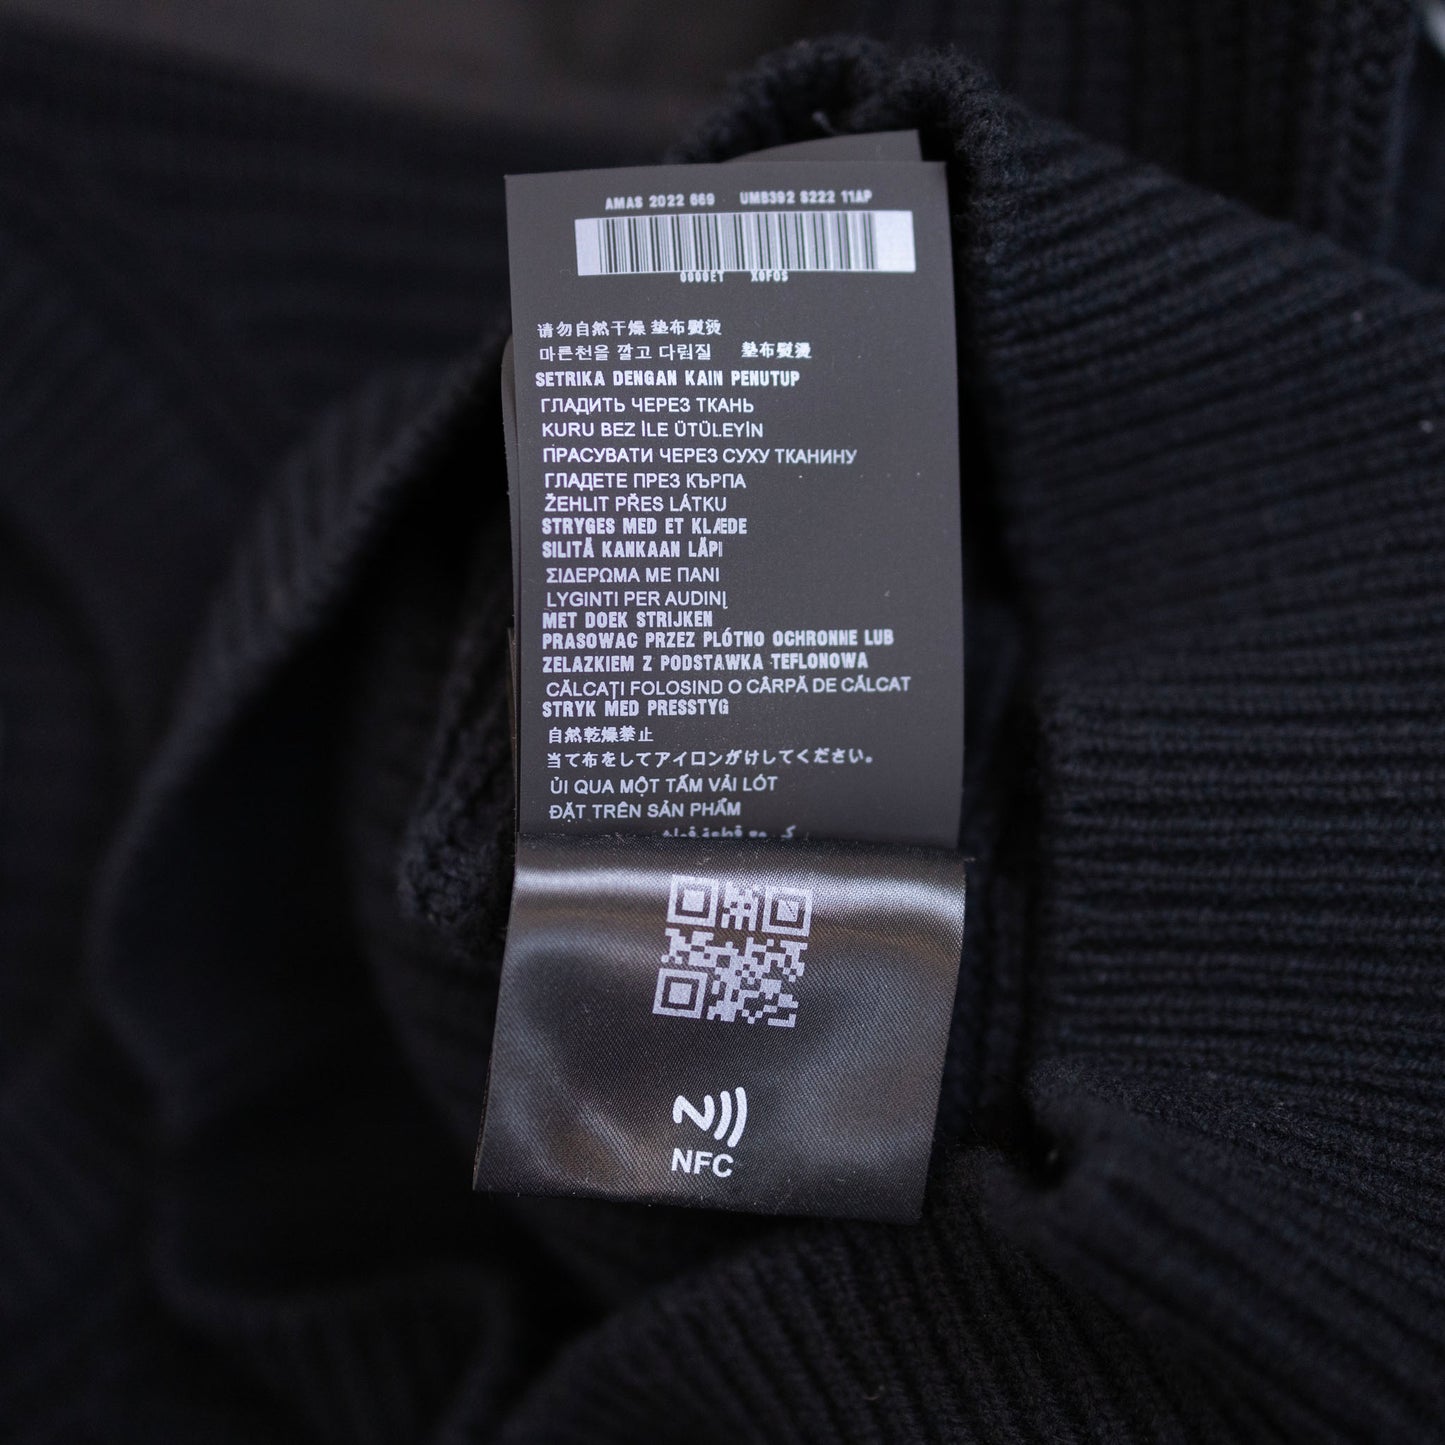 Wool and Re-Nylon Sweater